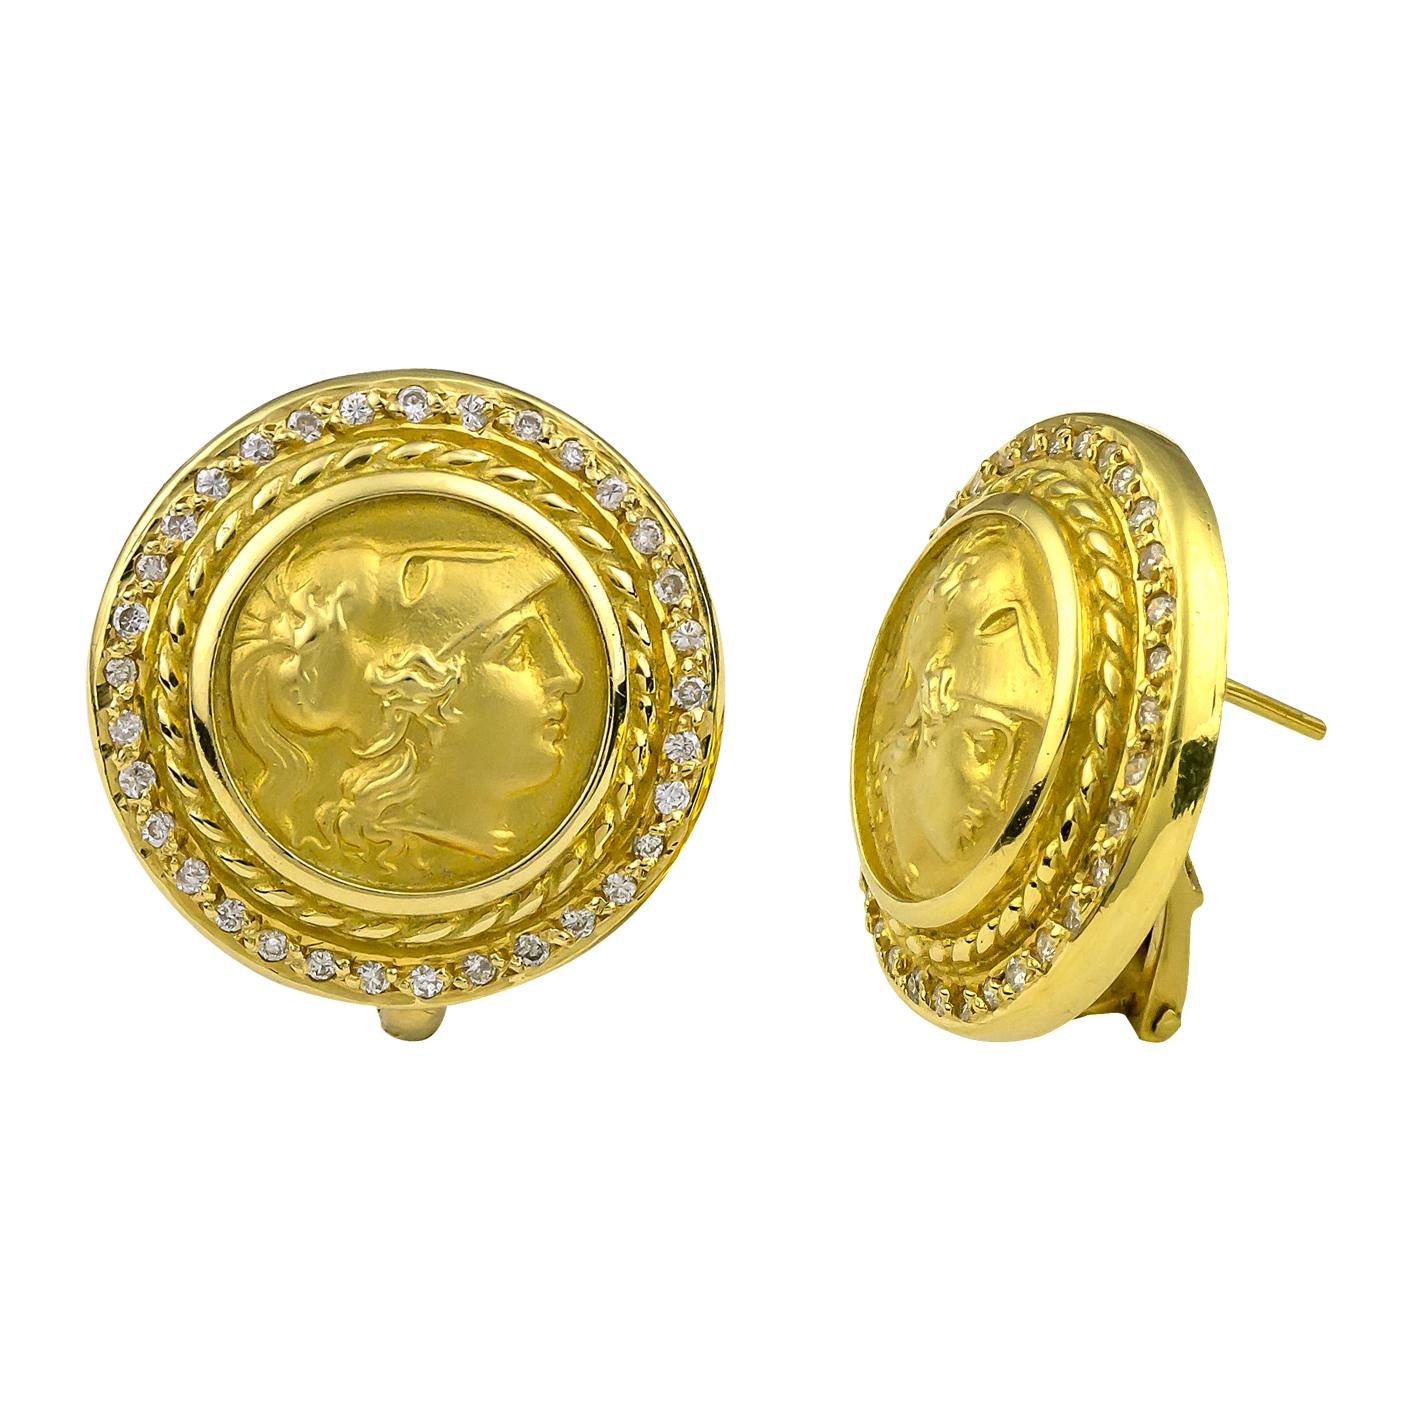 Round Cut Georgios Collections 18 Karat Yellow Gold Diamond Coin Stud Earrings of Athina For Sale